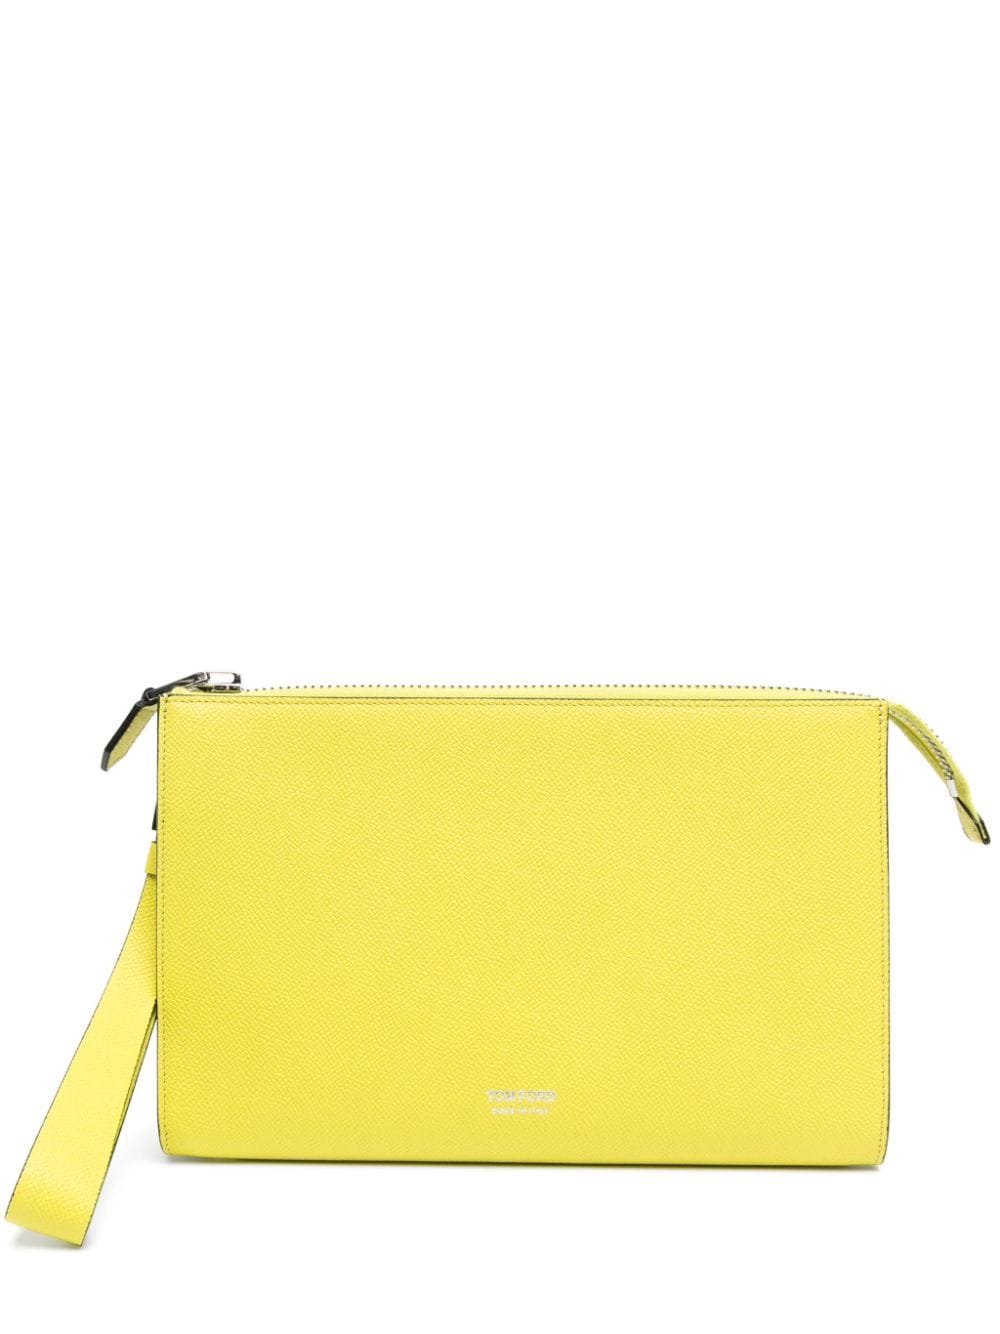 TOM FORD Mbags leather laptop bag - Yellow von TOM FORD